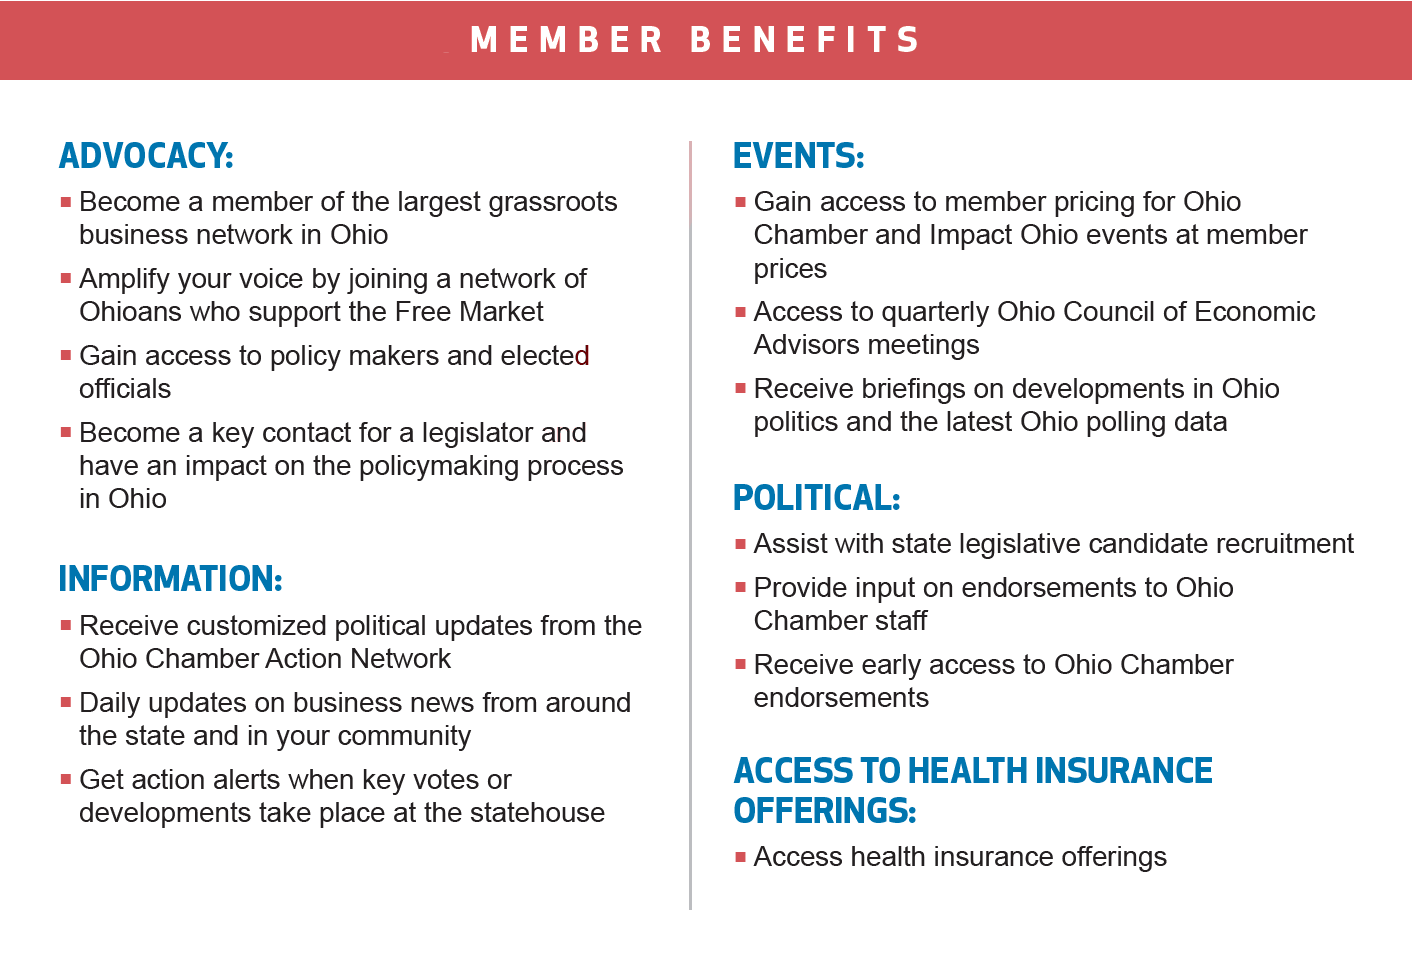 Member Benefits for AN2